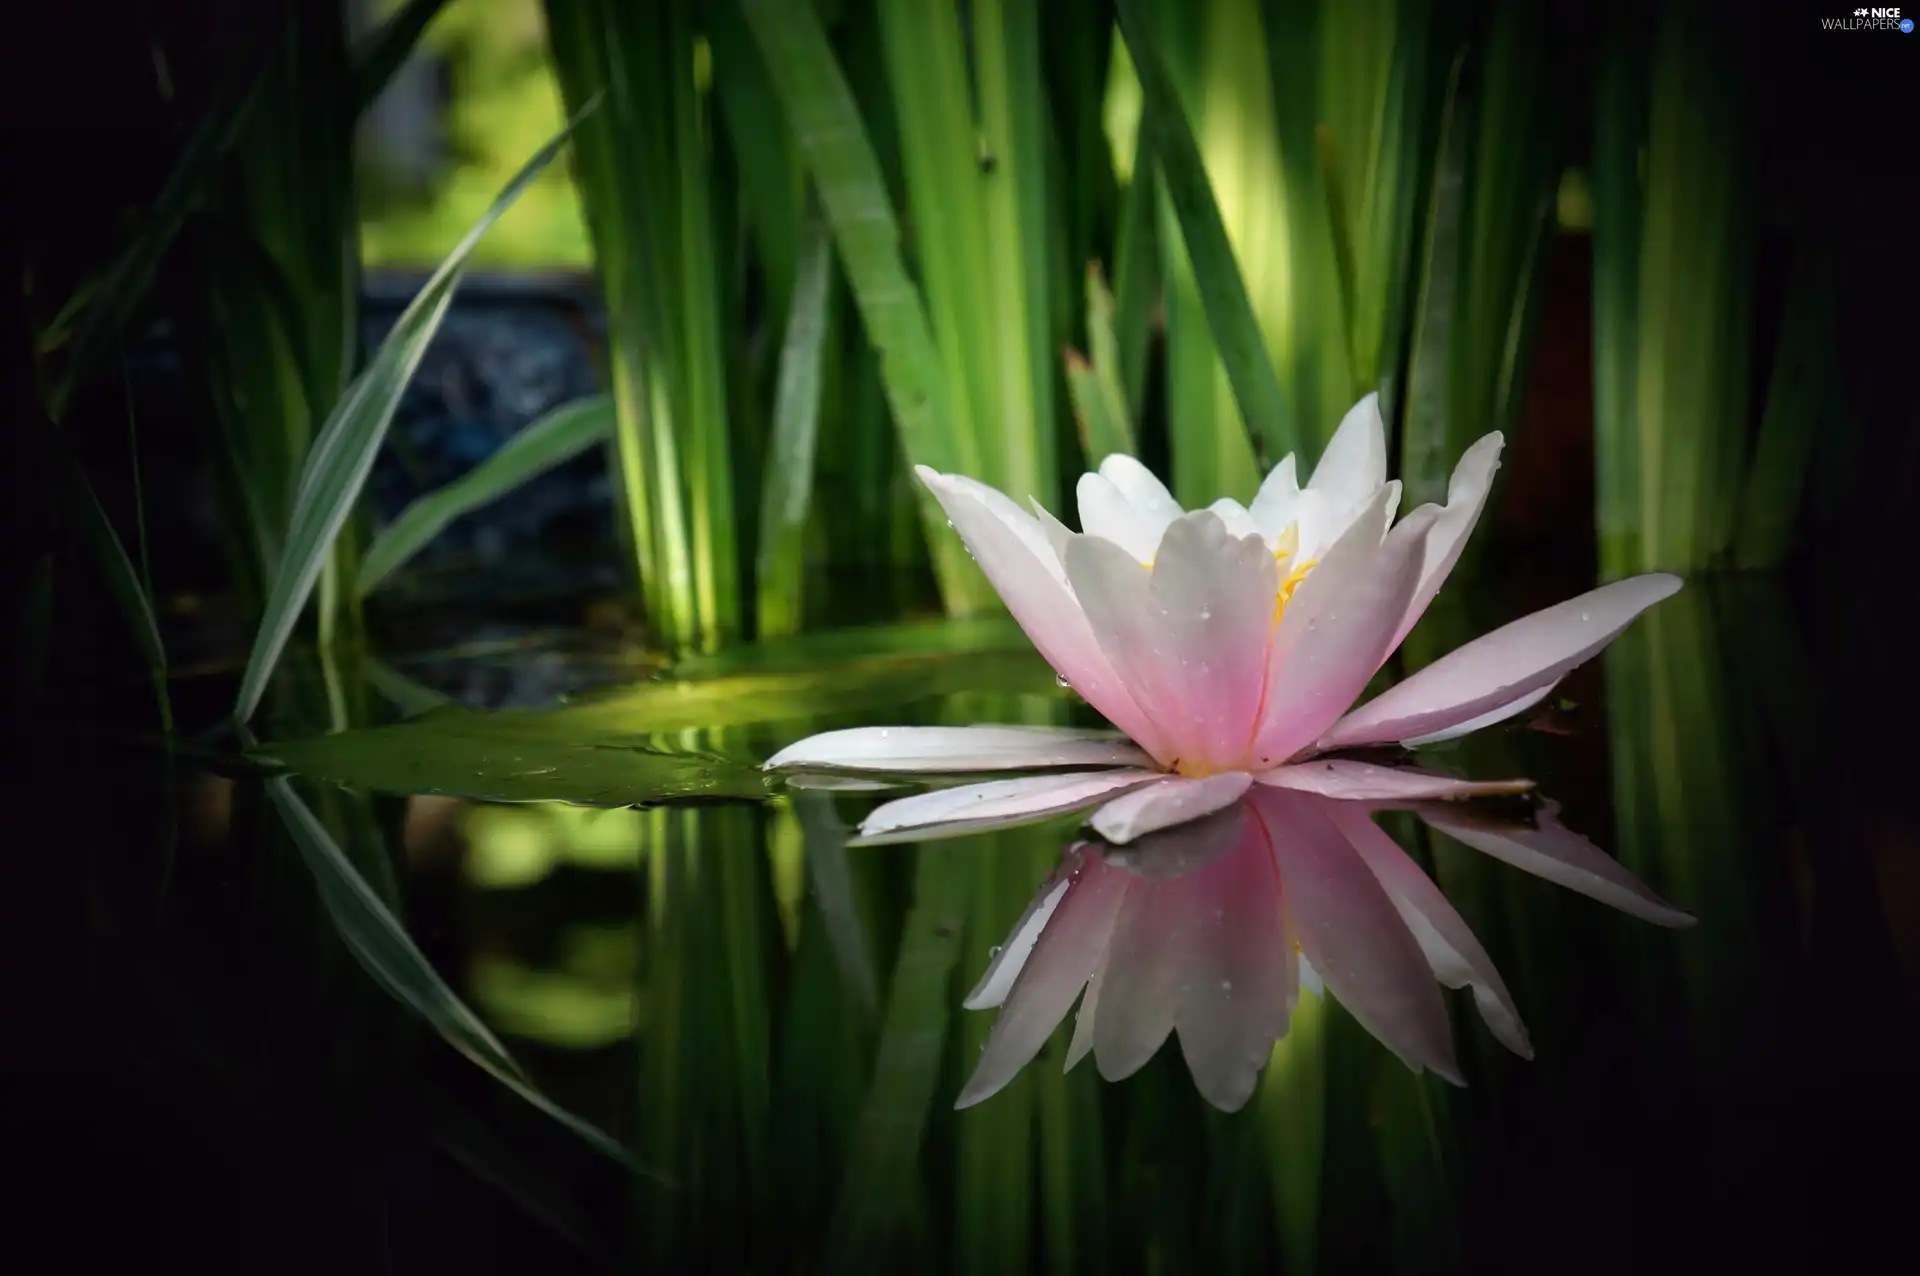 reflection, Lily, water